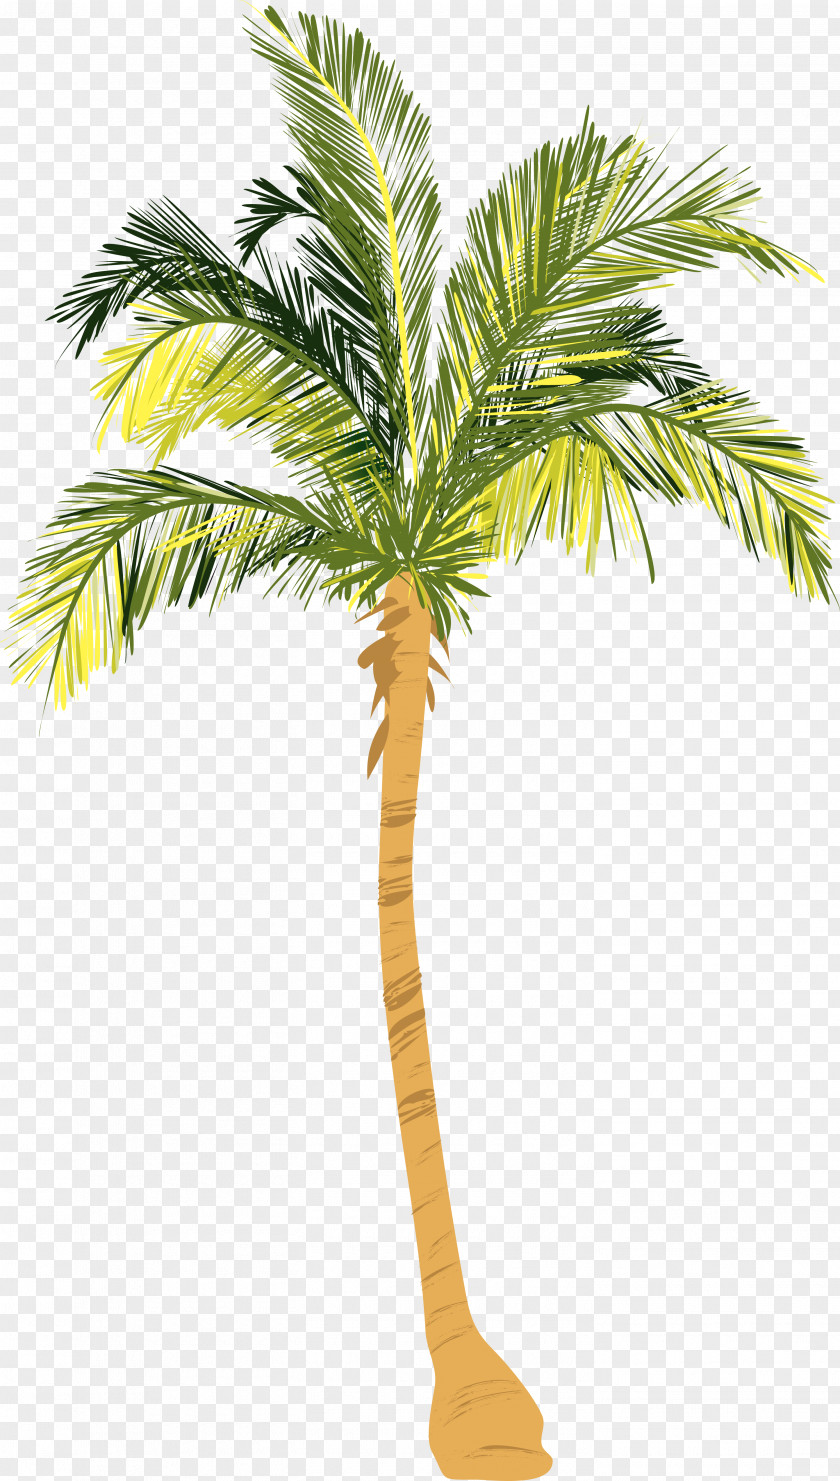 Palm Tree Nut Allergy Arecaceae Coconut Woody Plant PNG